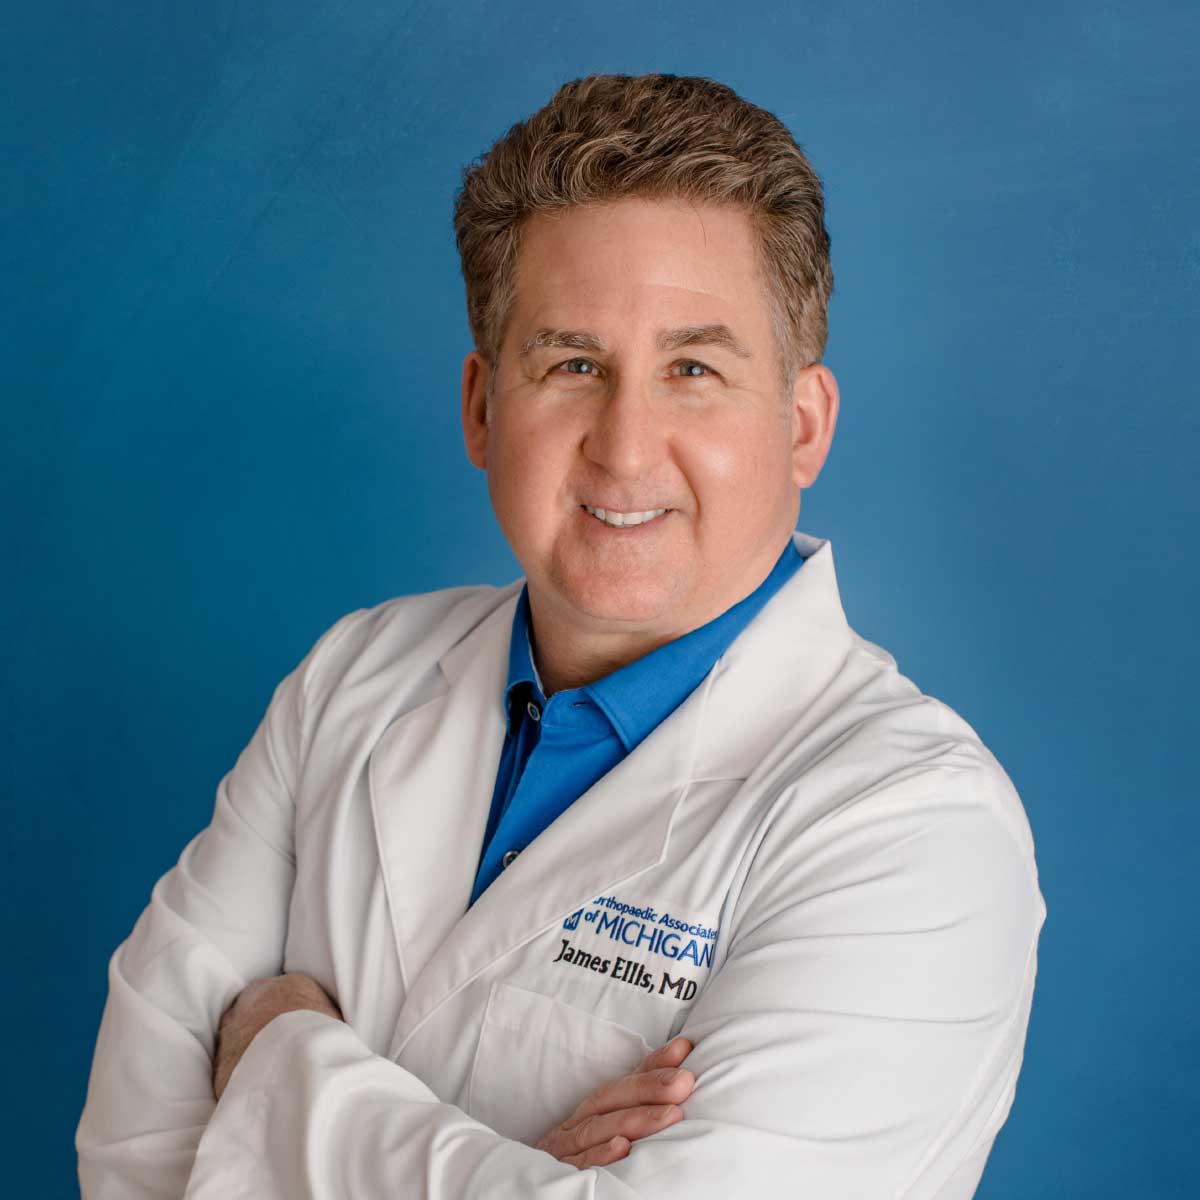 James Ellis, MD - Orthopedic Physicians in Greater Grand Rapids, MI